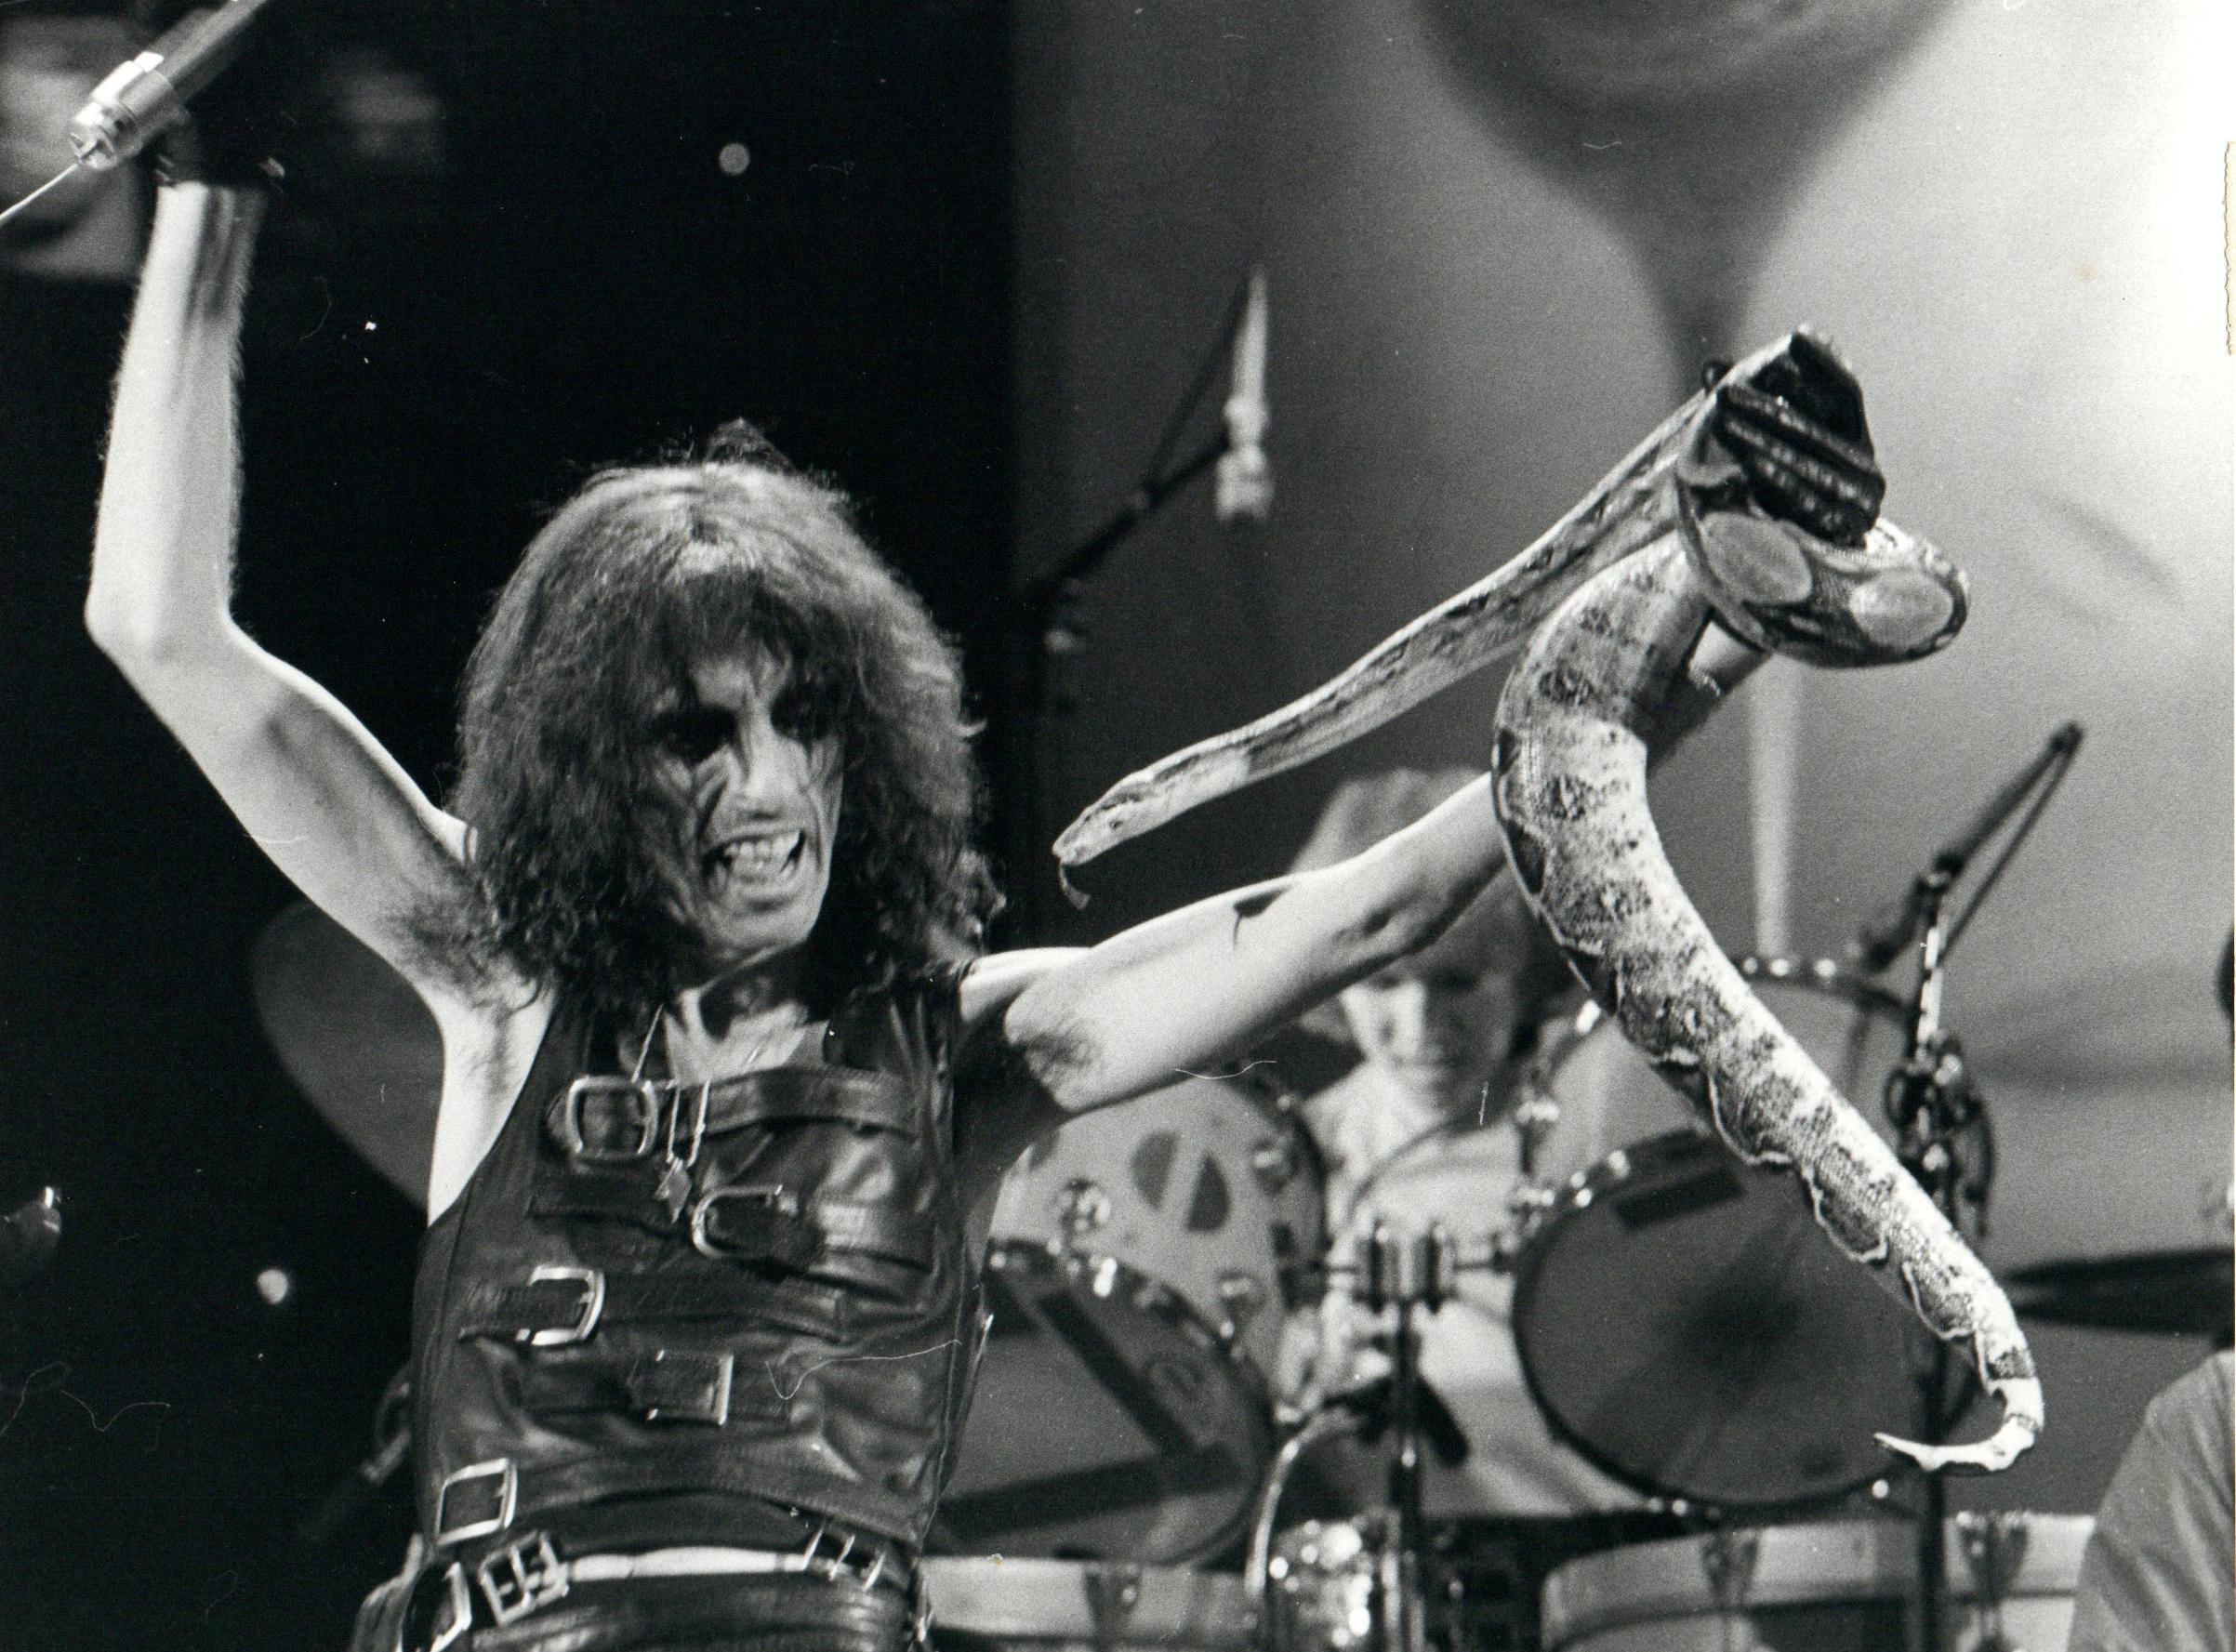 Chris Walter Black and White Photograph - Alice Cooper Performing with Boa Snake Vintage Original Photograph